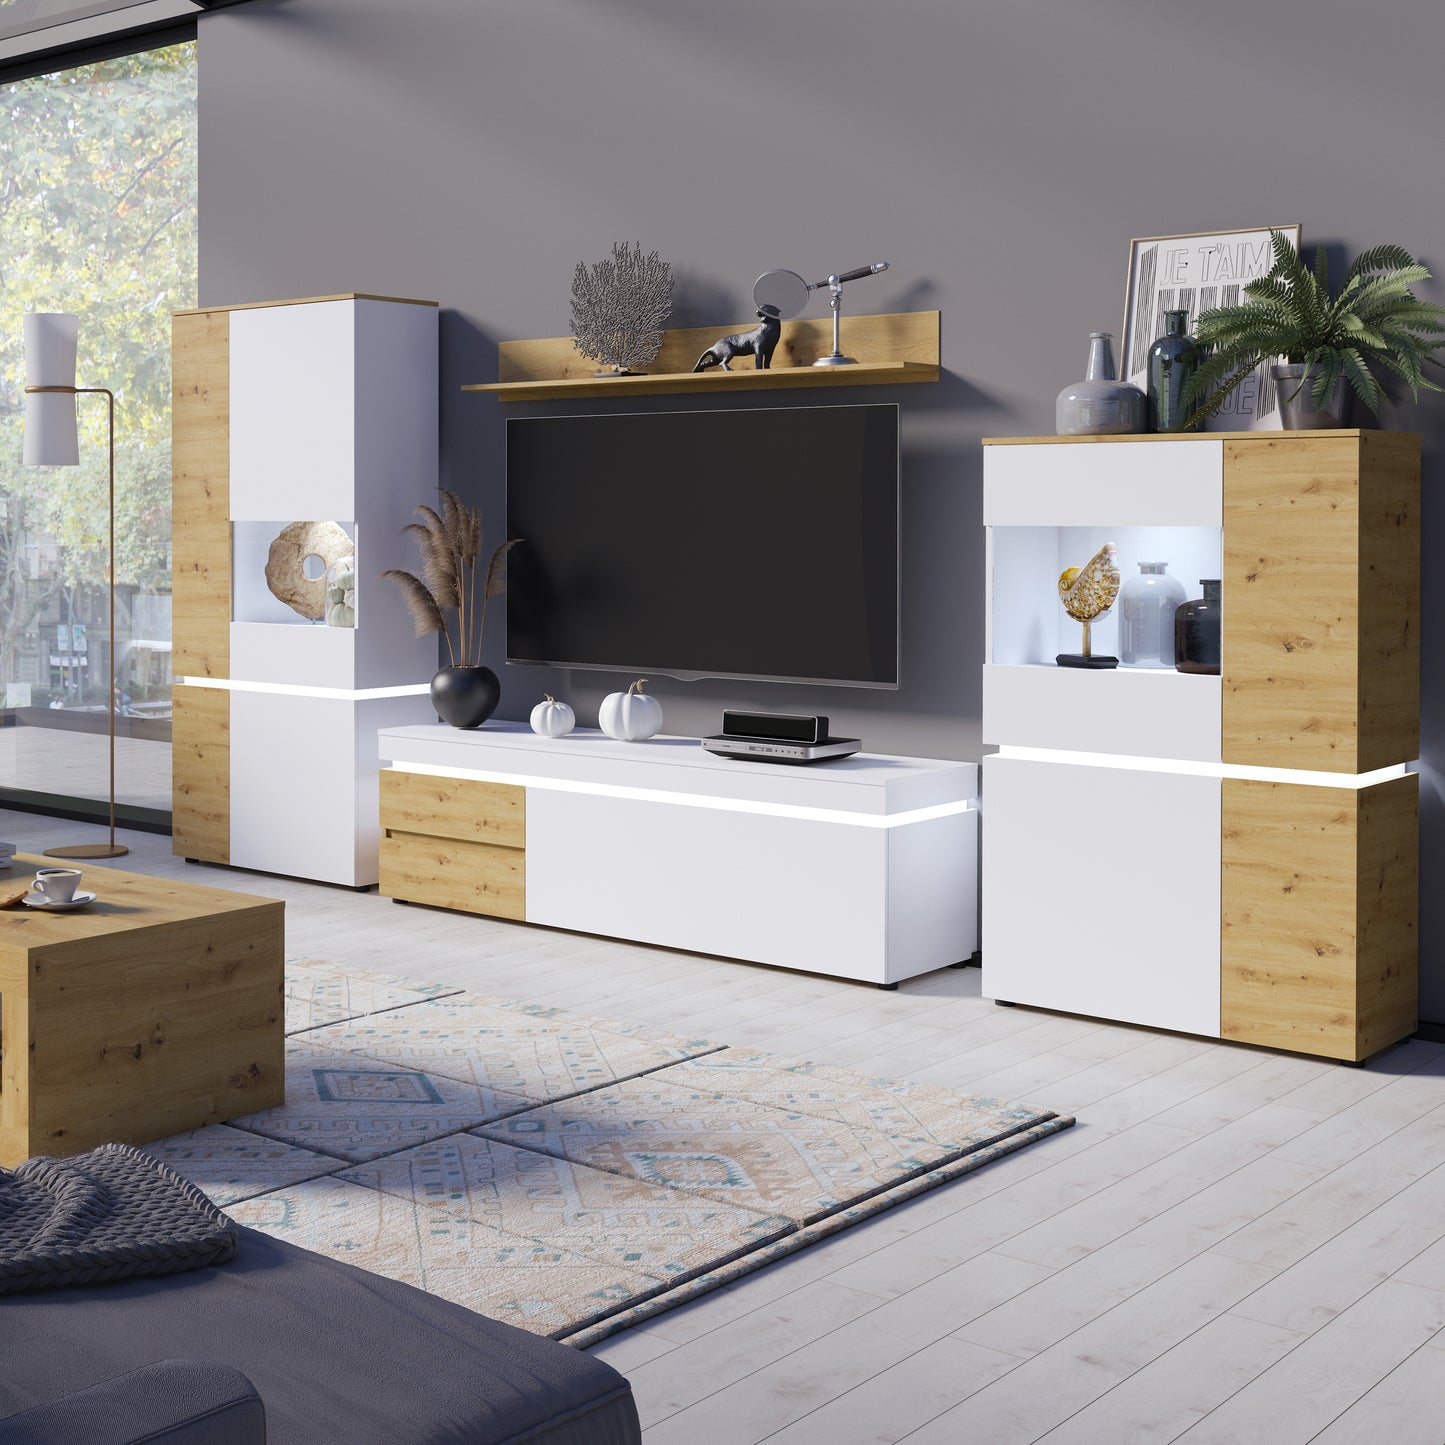 Luci Bright Luci 1 door 2 drawer 180 cm wide TV unit (including LED lighting) in White and Oak